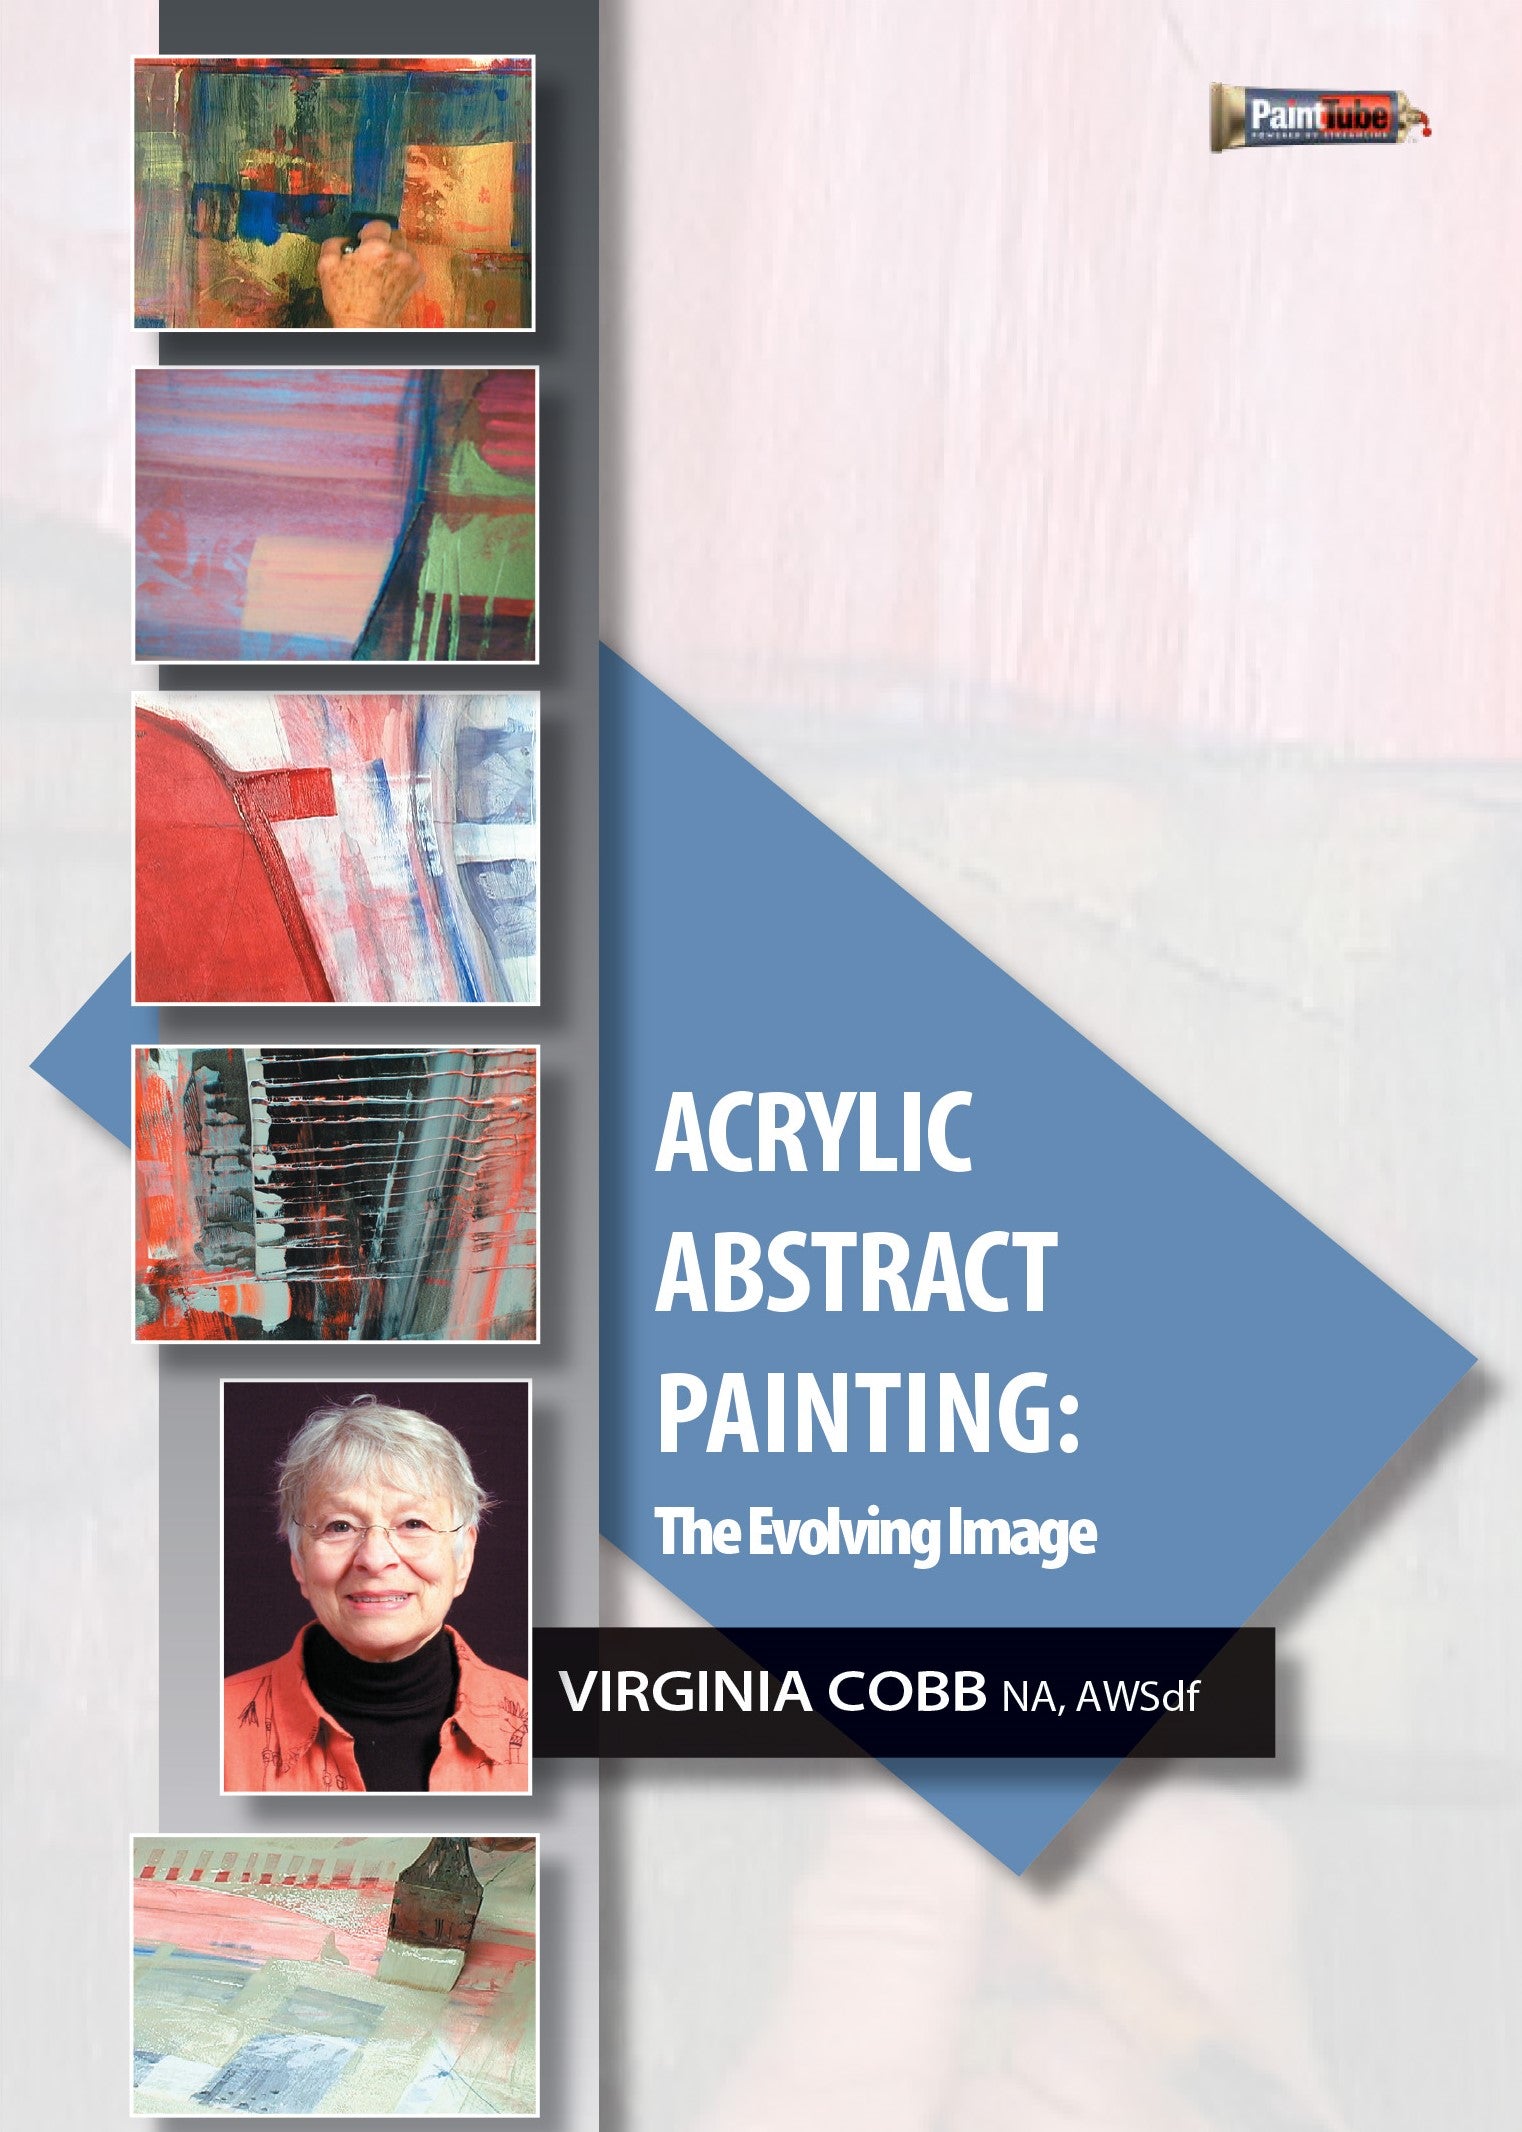 Virginia Cobb: Acrylic Abstract Painting - The Evolving Image